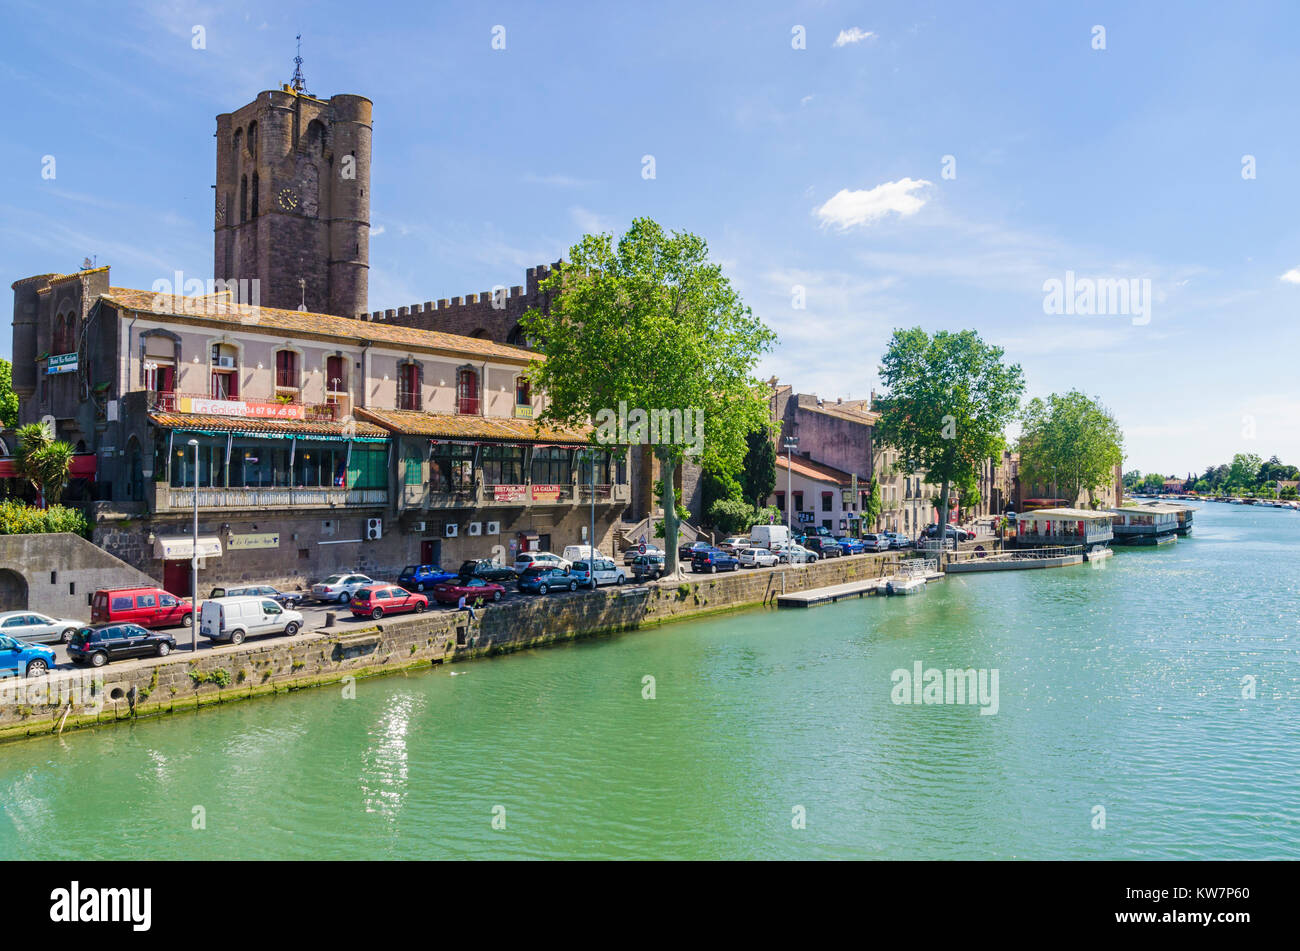 Small boats moored on the Herault River overlooked by Agde Cathedral in the town of Agde, Herault, Languedoc-Roussillon, France Stock Photo